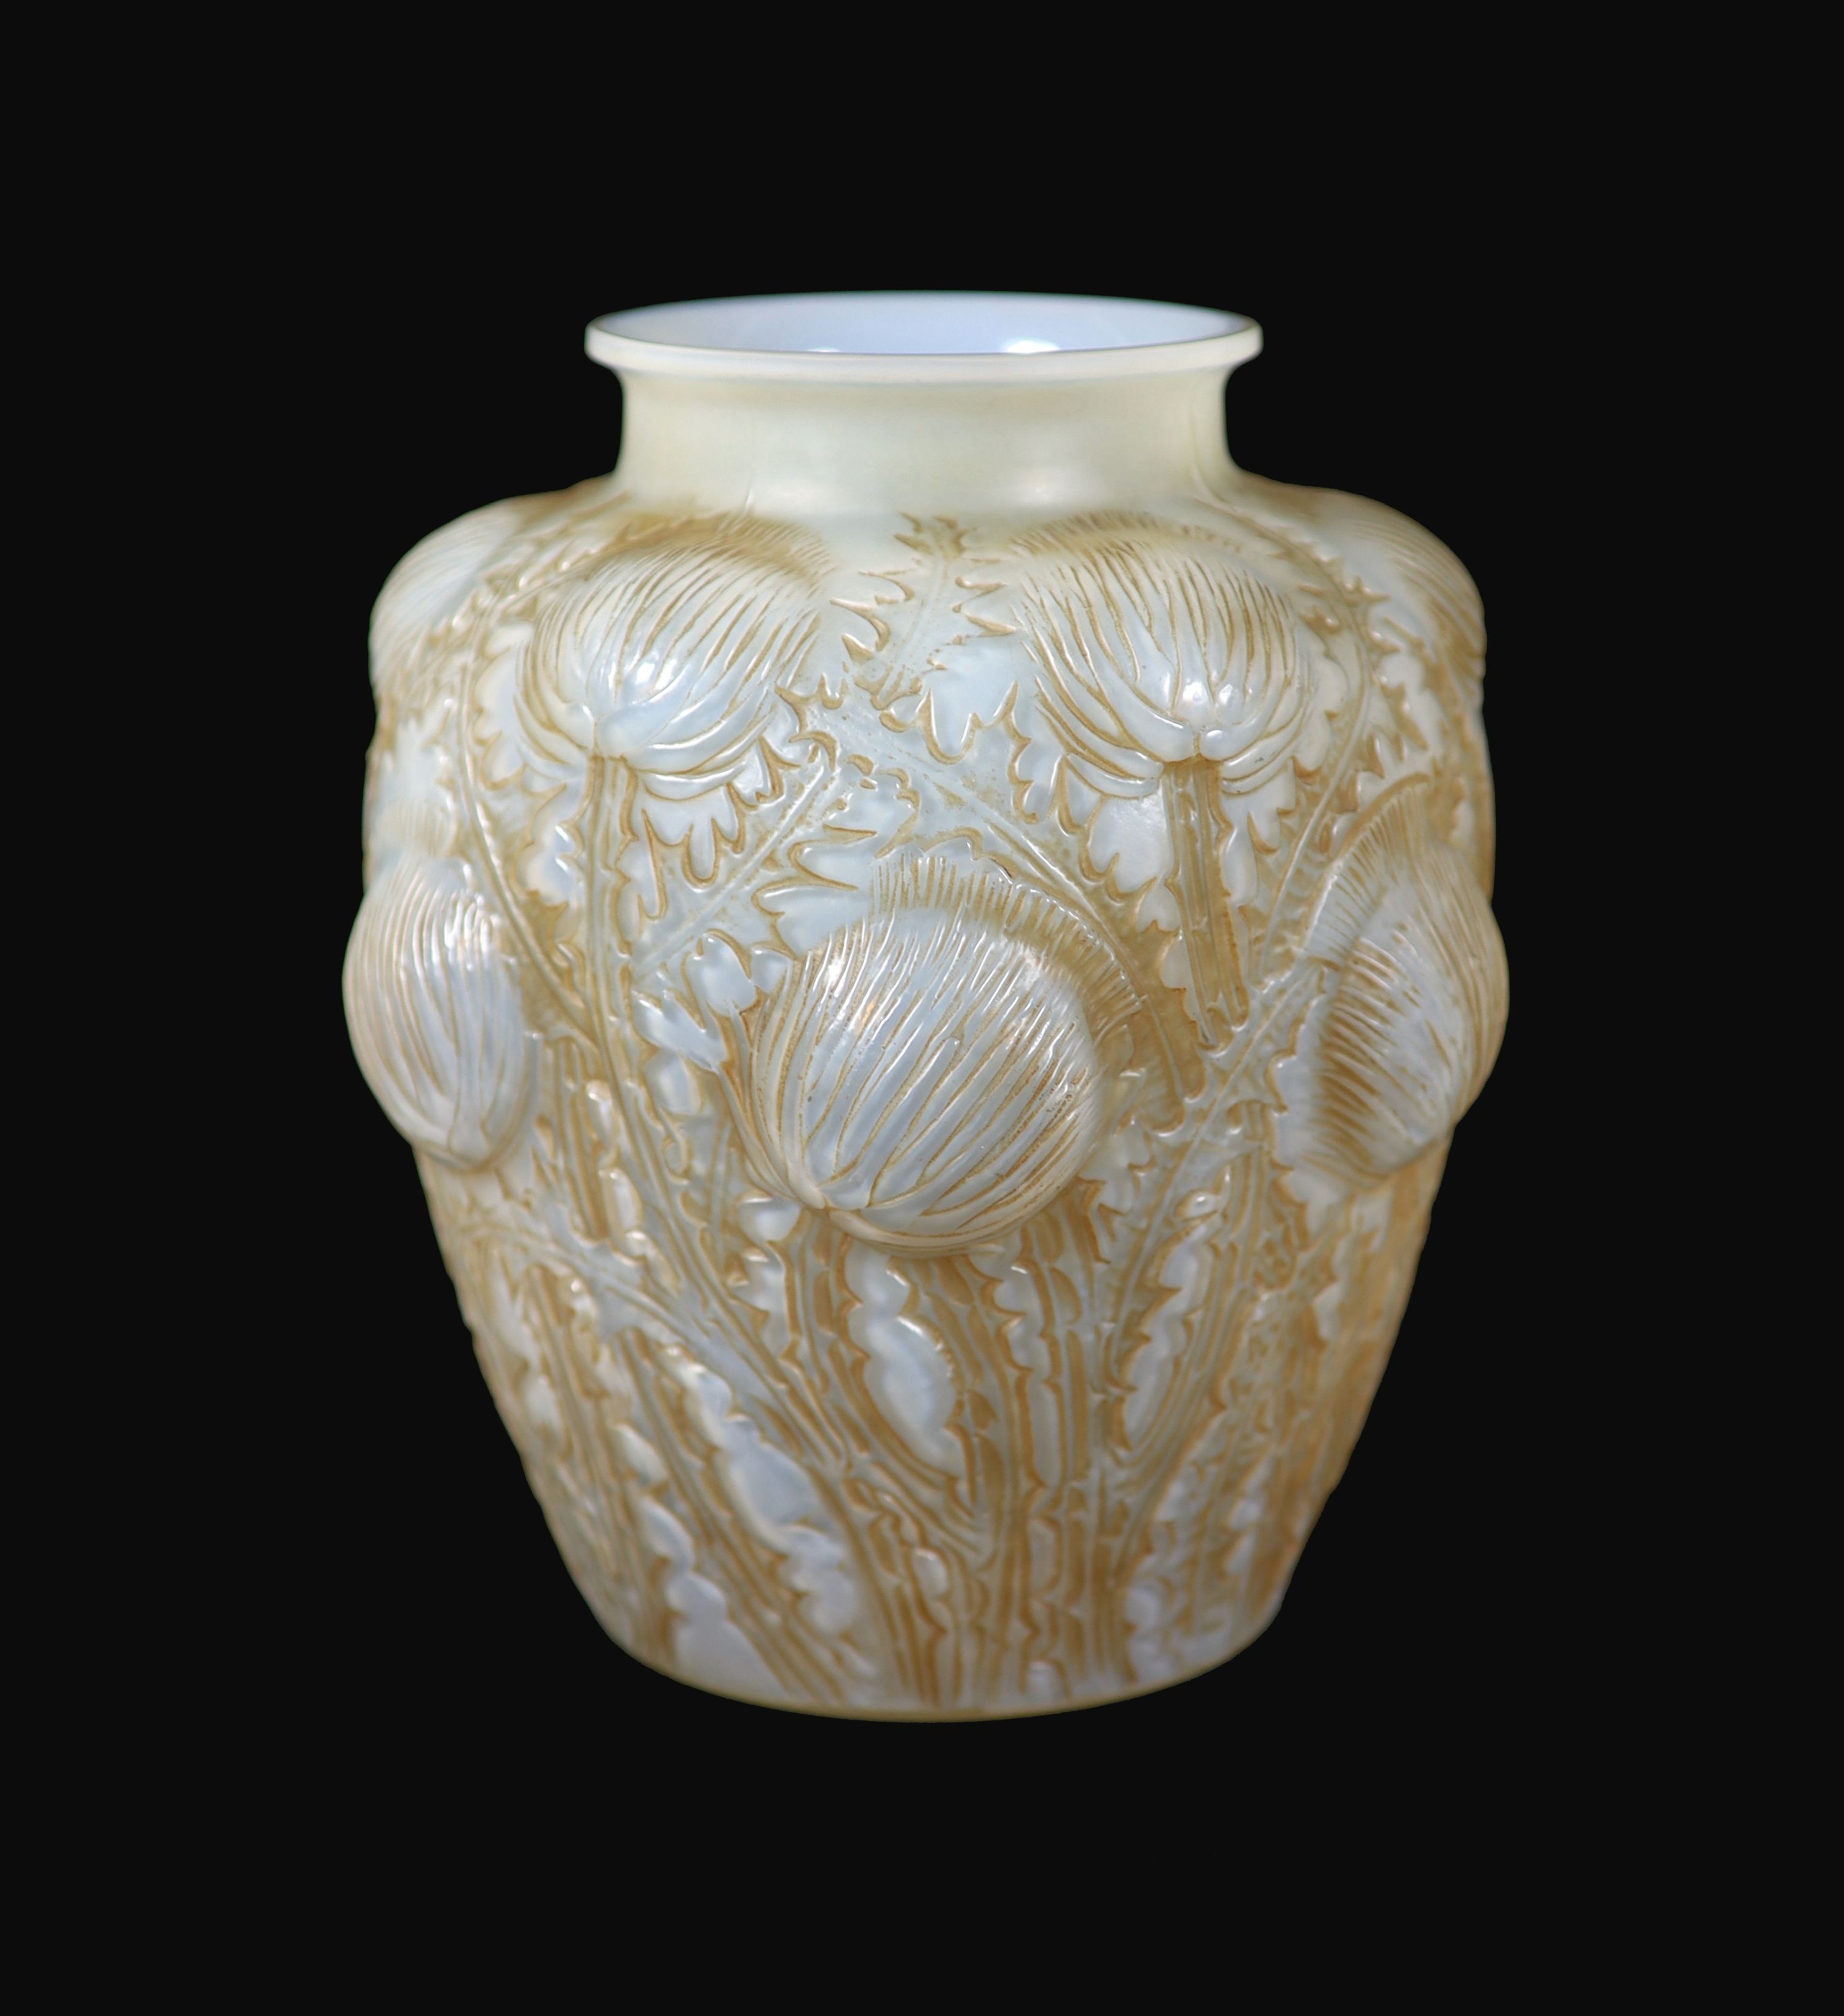 A Lalique Domrémy opalescent and amber stained glass vase, model no. 979, design c.1926, 21 cm high